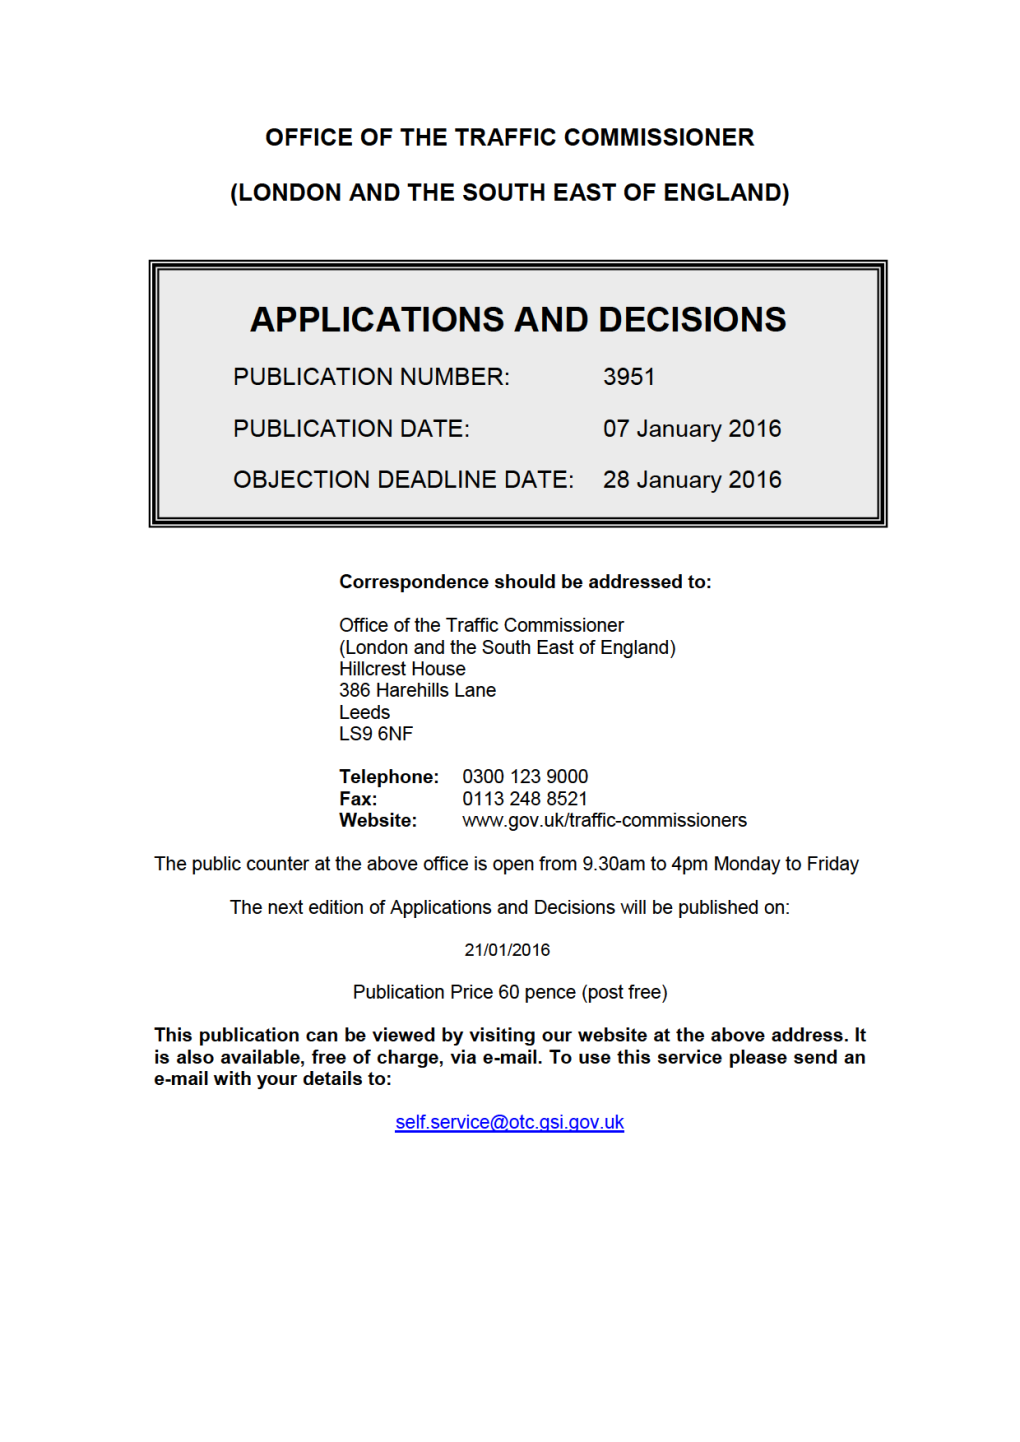 APPLICATIONS and DECISIONS 7 January 2016